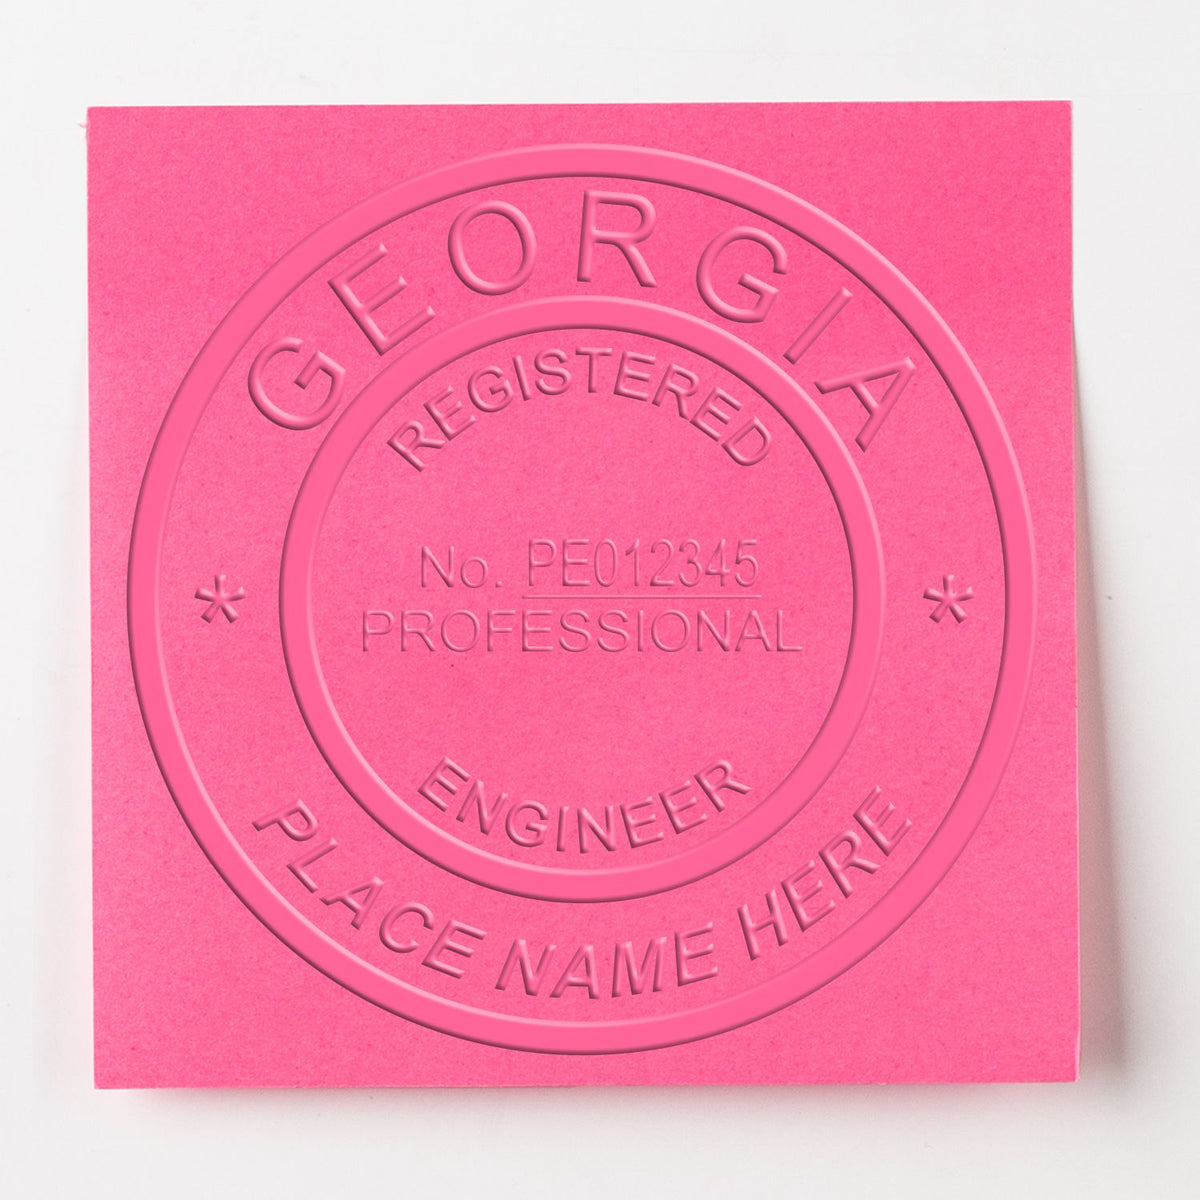 An in use photo of the Gift Georgia Engineer Seal showing a sample imprint on a cardstock